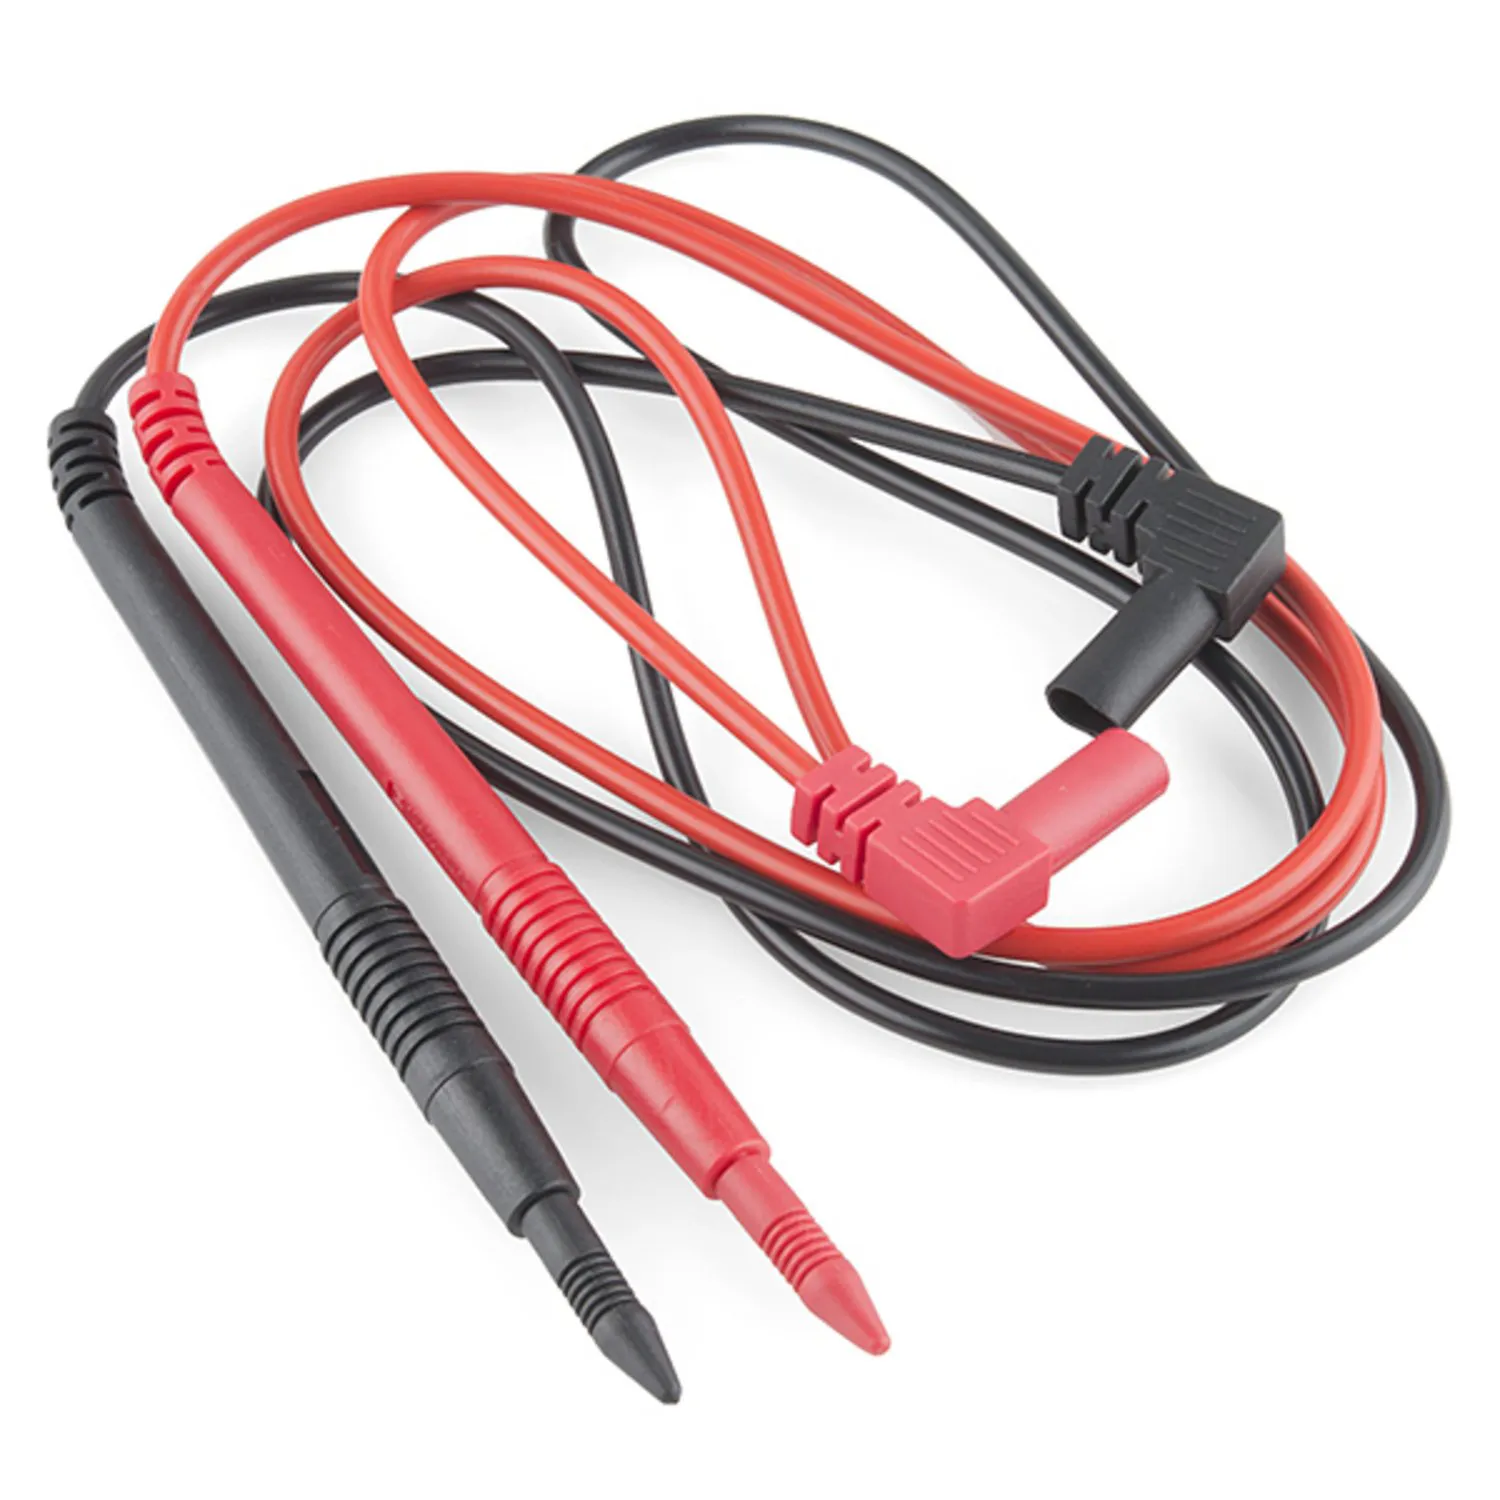 Photo of Multimeter Probes - Needle Tipped